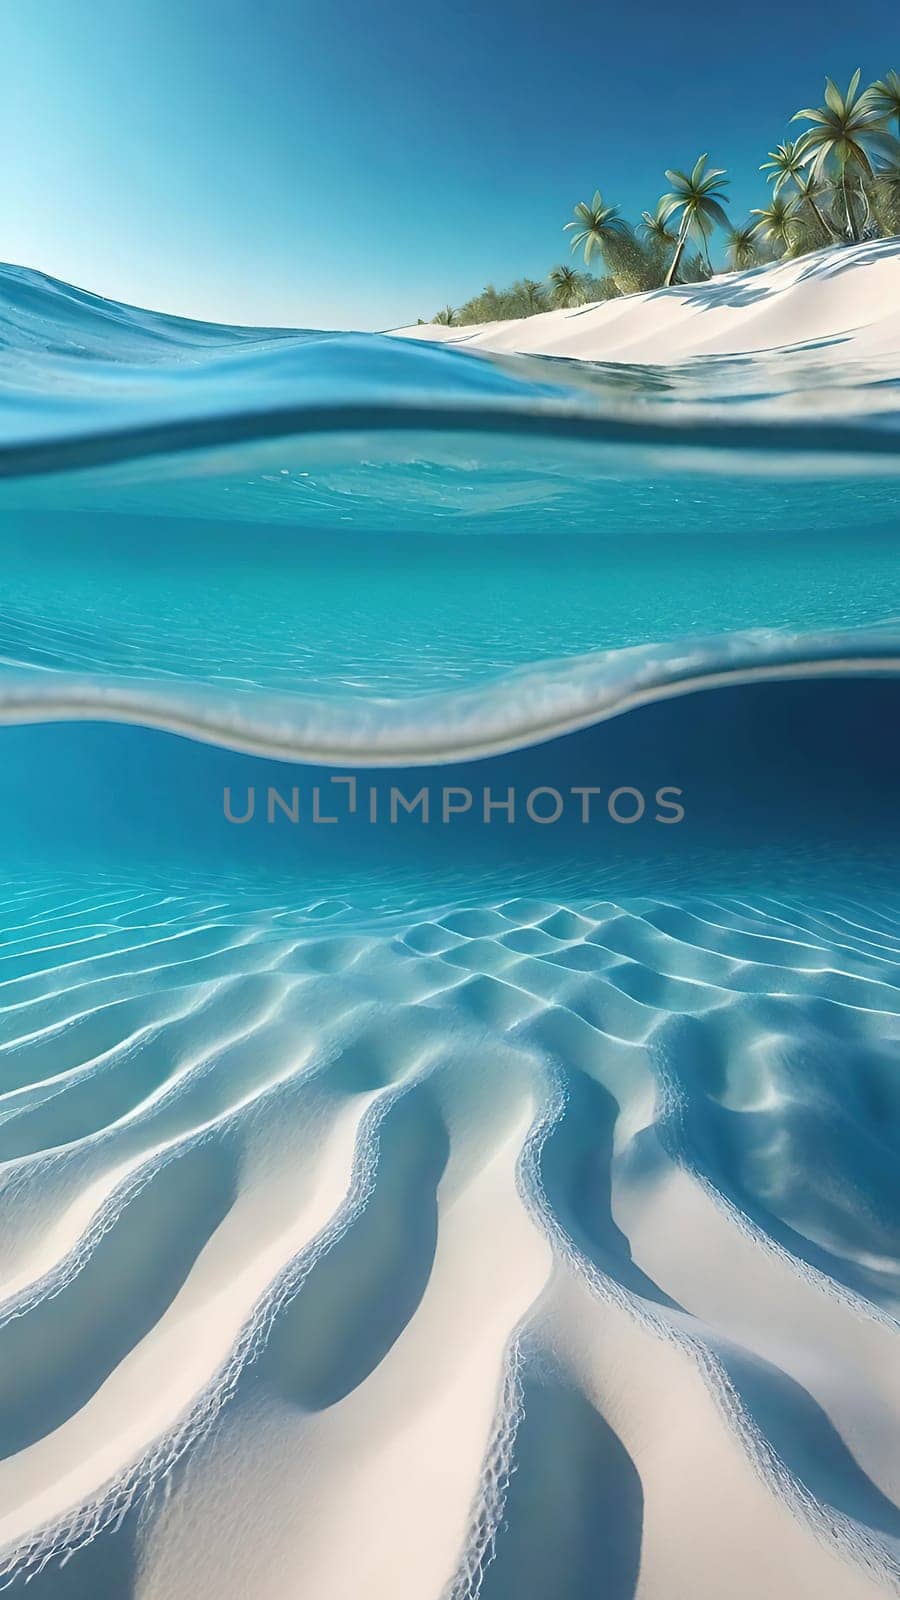 Underwater view of the sea with waves and sand. by yilmazsavaskandag